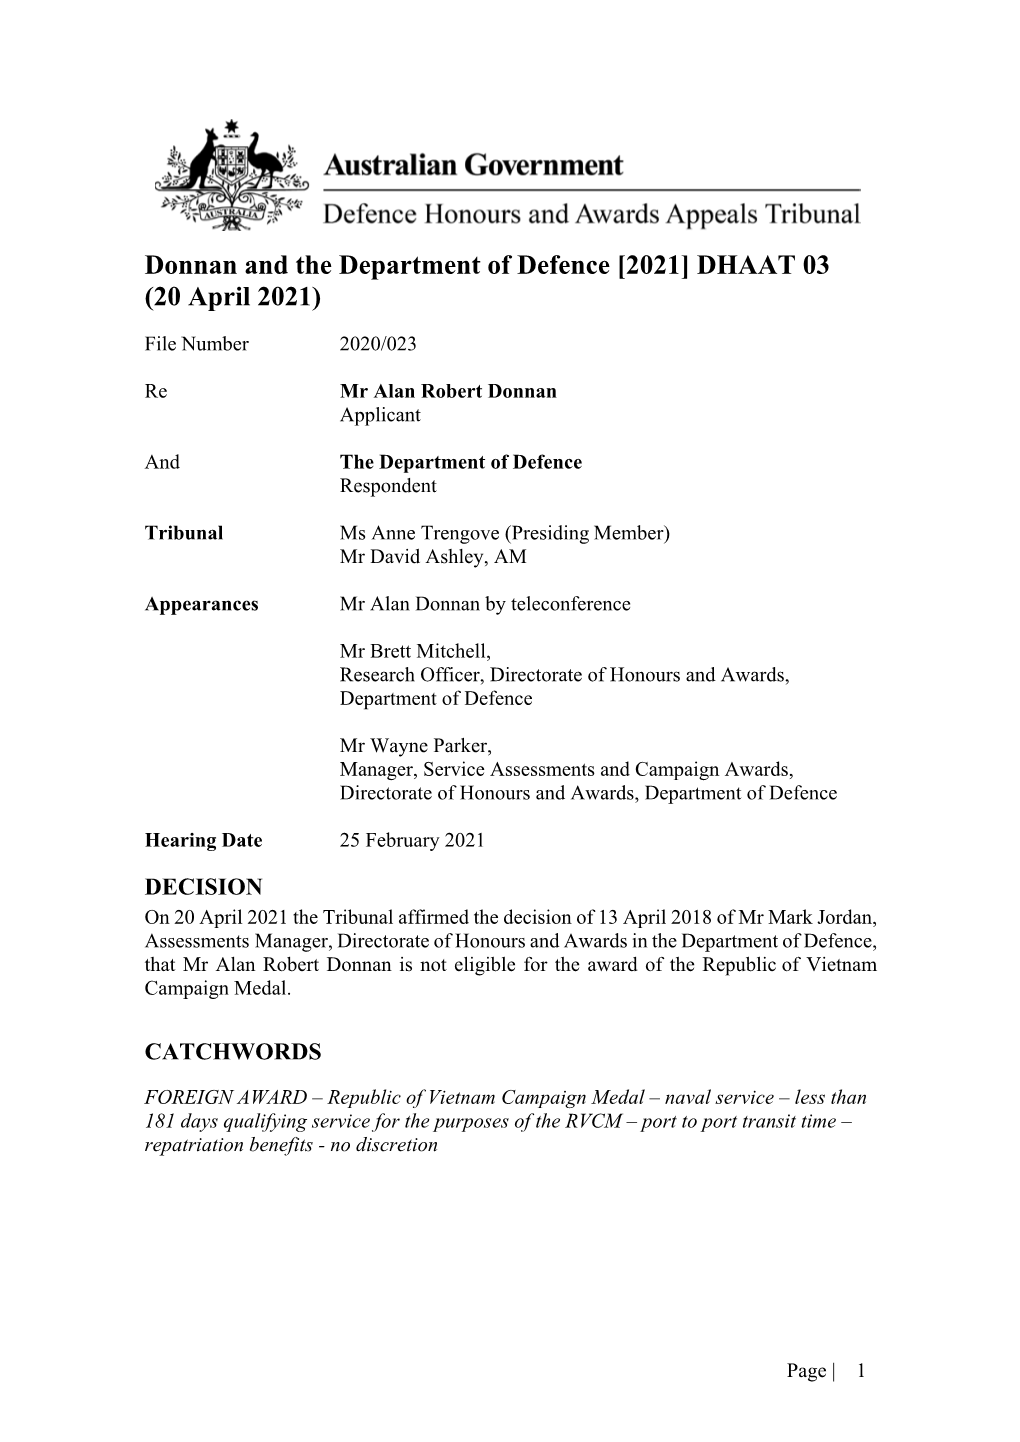 Donnan and the Department of Defence [2021] DHAAT 03 (20 April 2021)